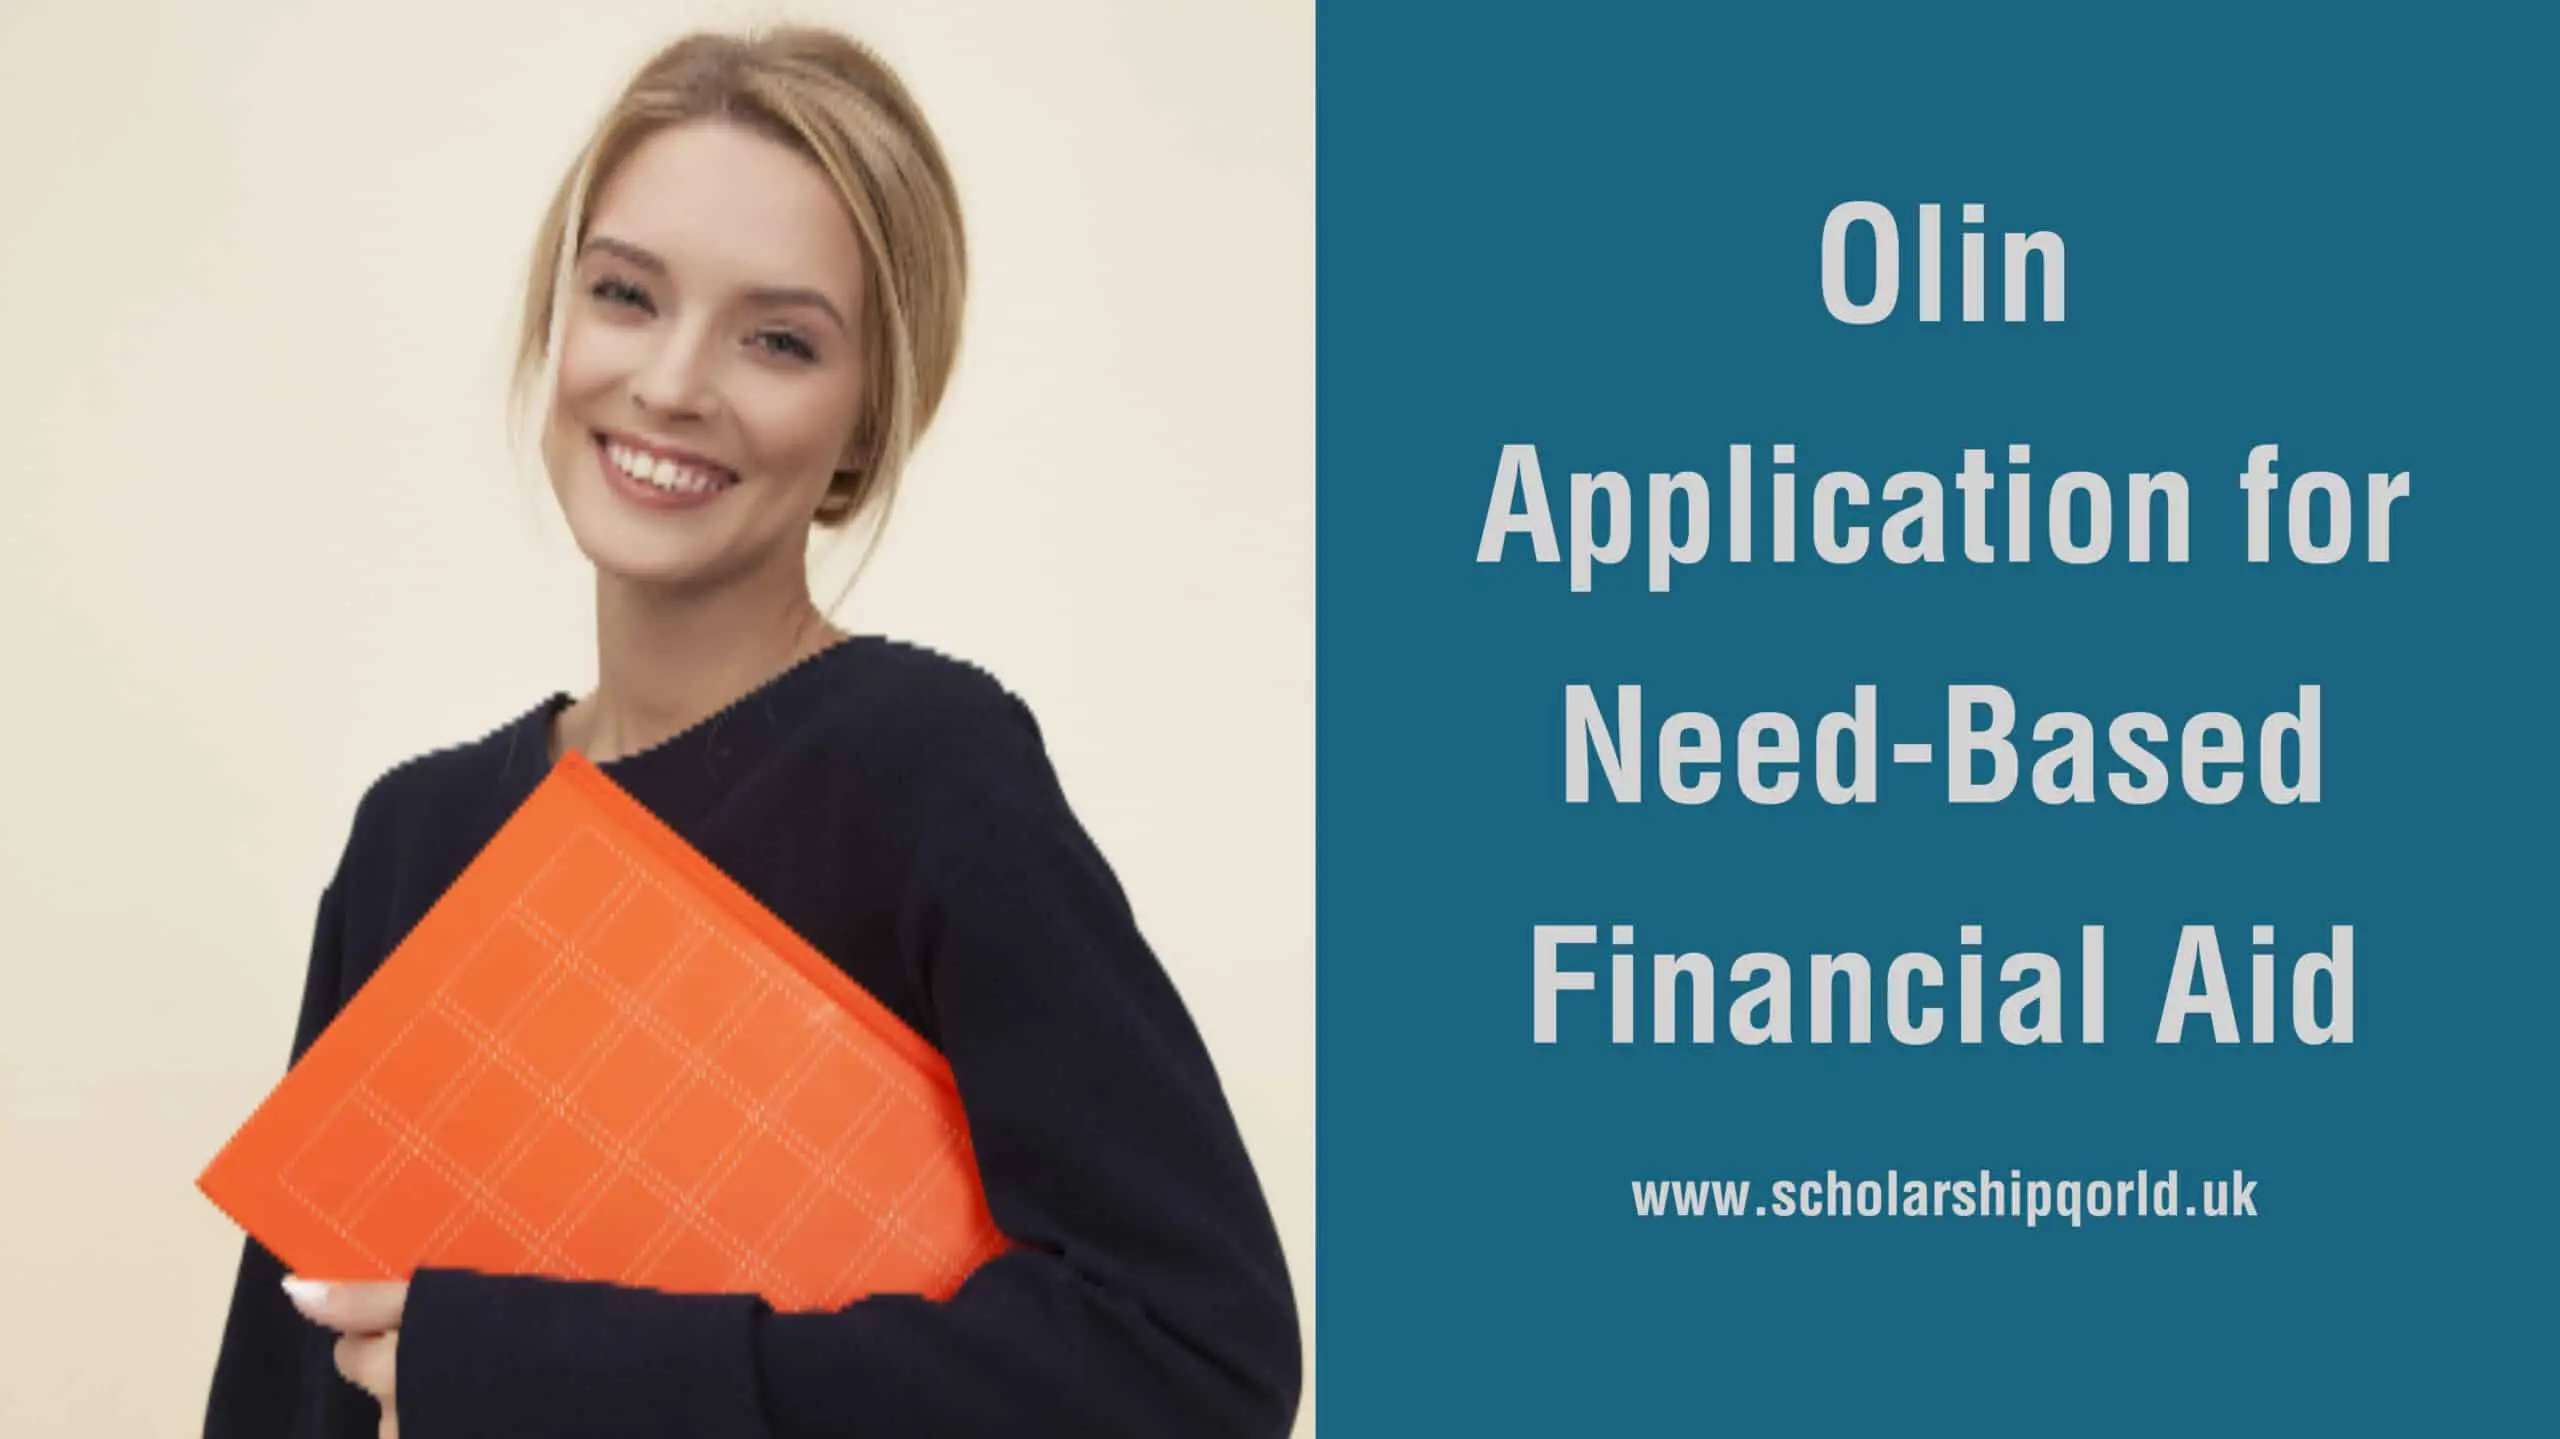 Olin Application for Need-Based Financial Aid